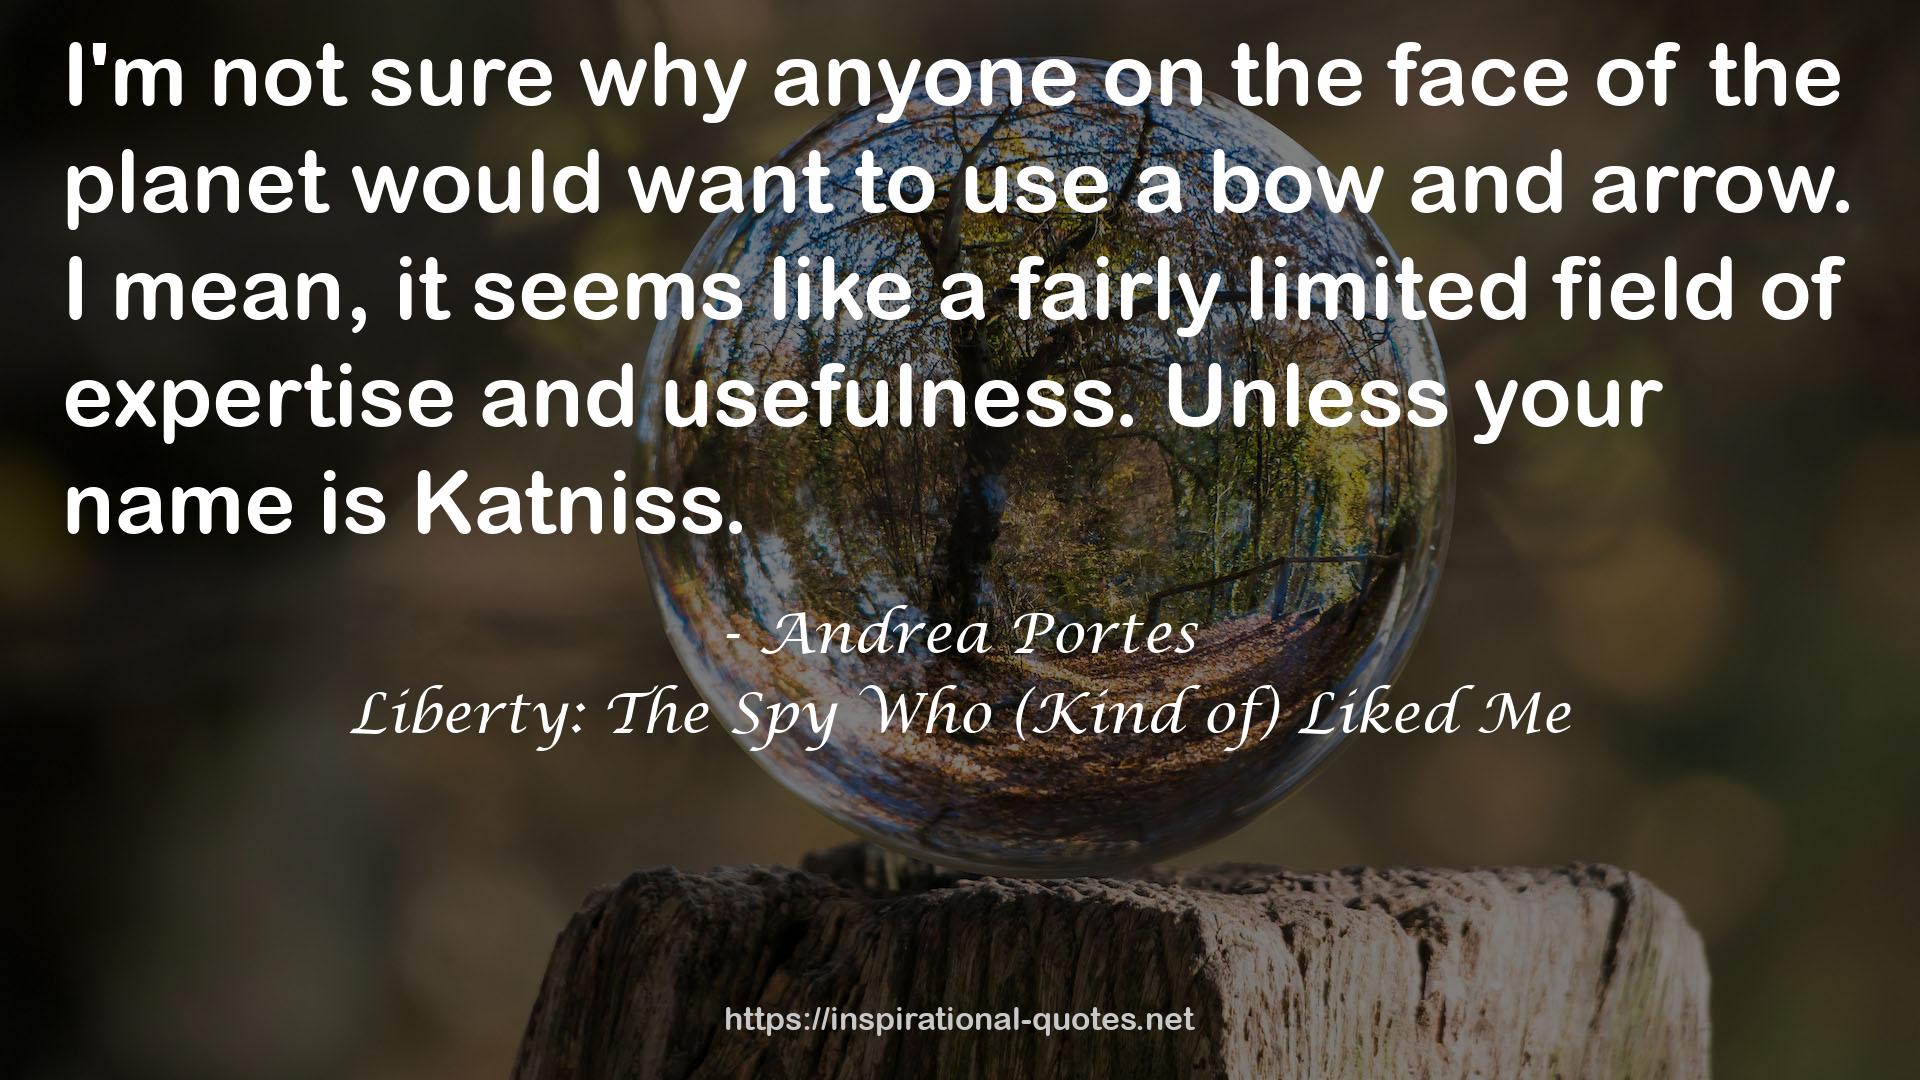 Liberty: The Spy Who (Kind of) Liked Me QUOTES